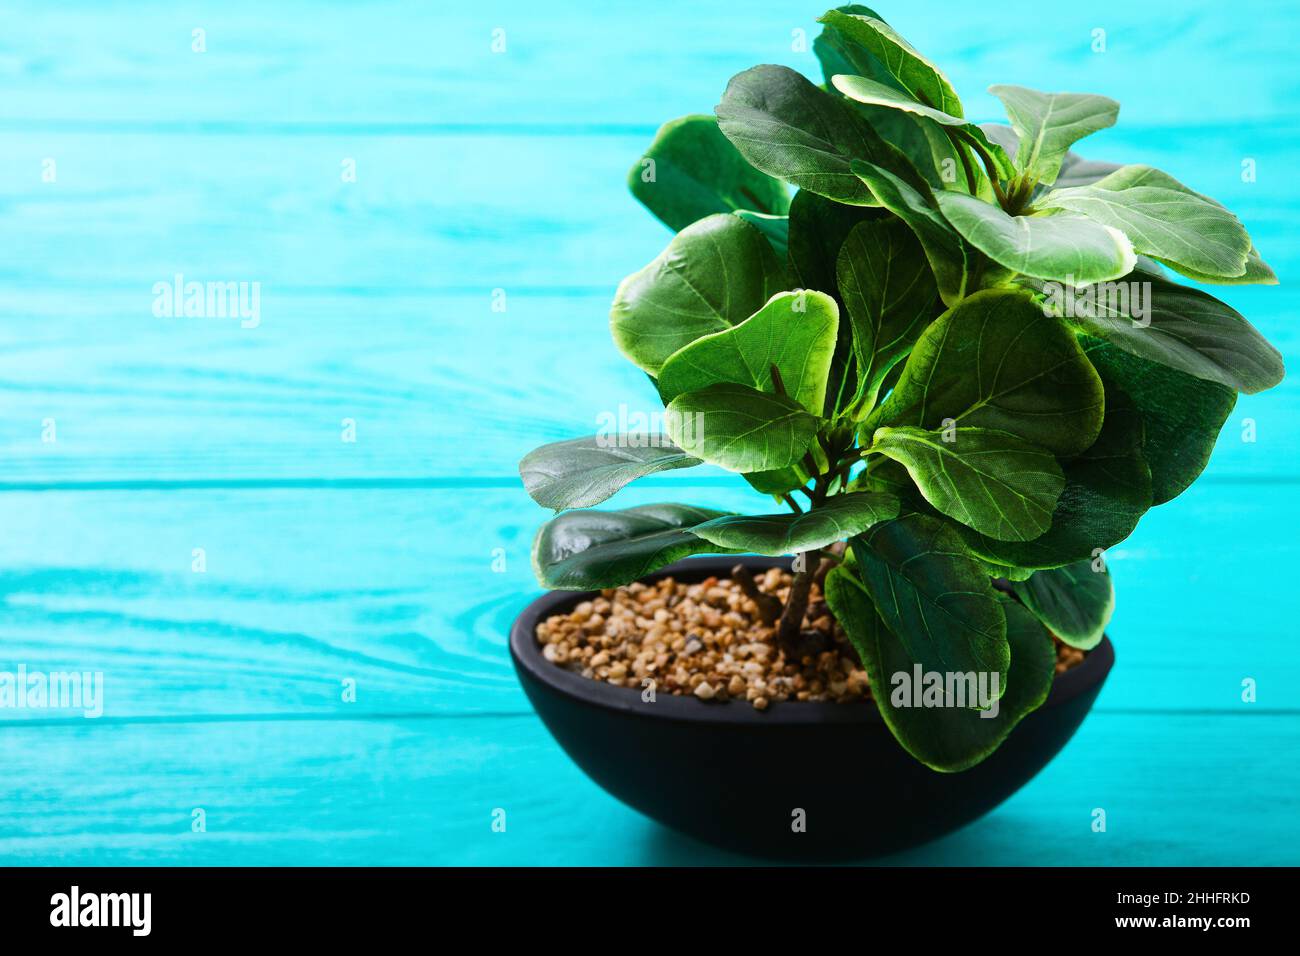 Green plant in a pot on blue wooden table. Selective focus Stock Photo